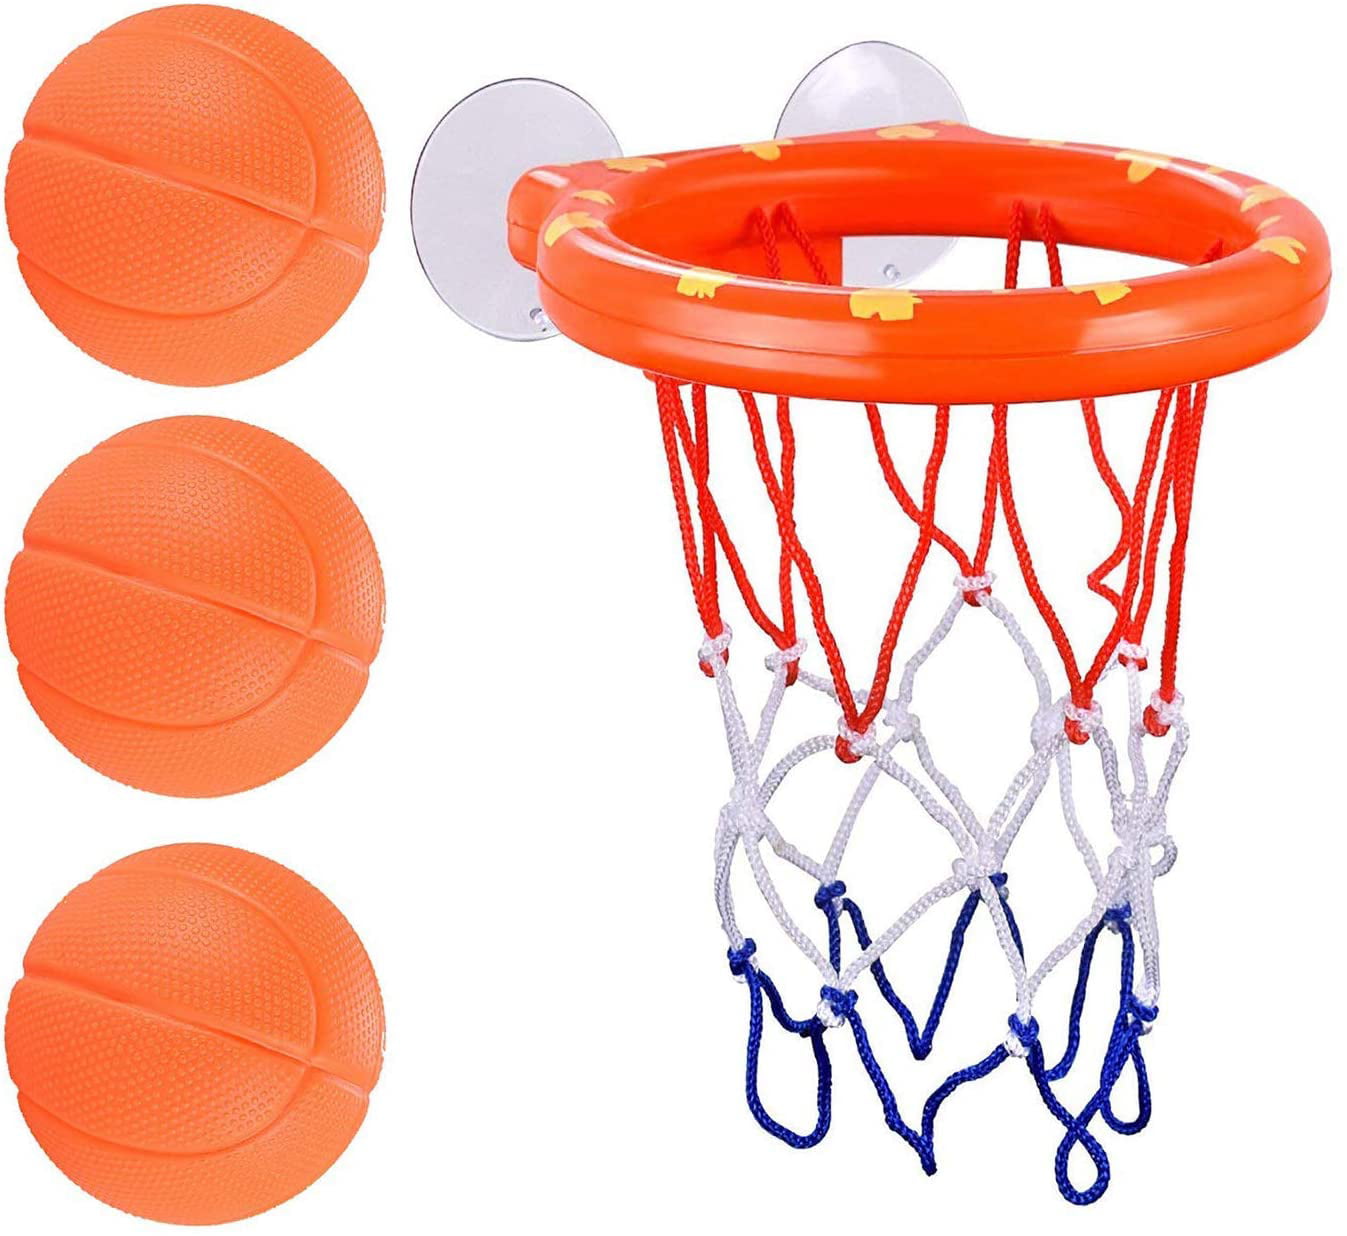 Kids Bath Toy Basketball Hoop & Balls Playset for Boys Girls Bathtub Shooting Basket Game Toddlers Gift Set Suctions Cups That Stick to Smooth Place 